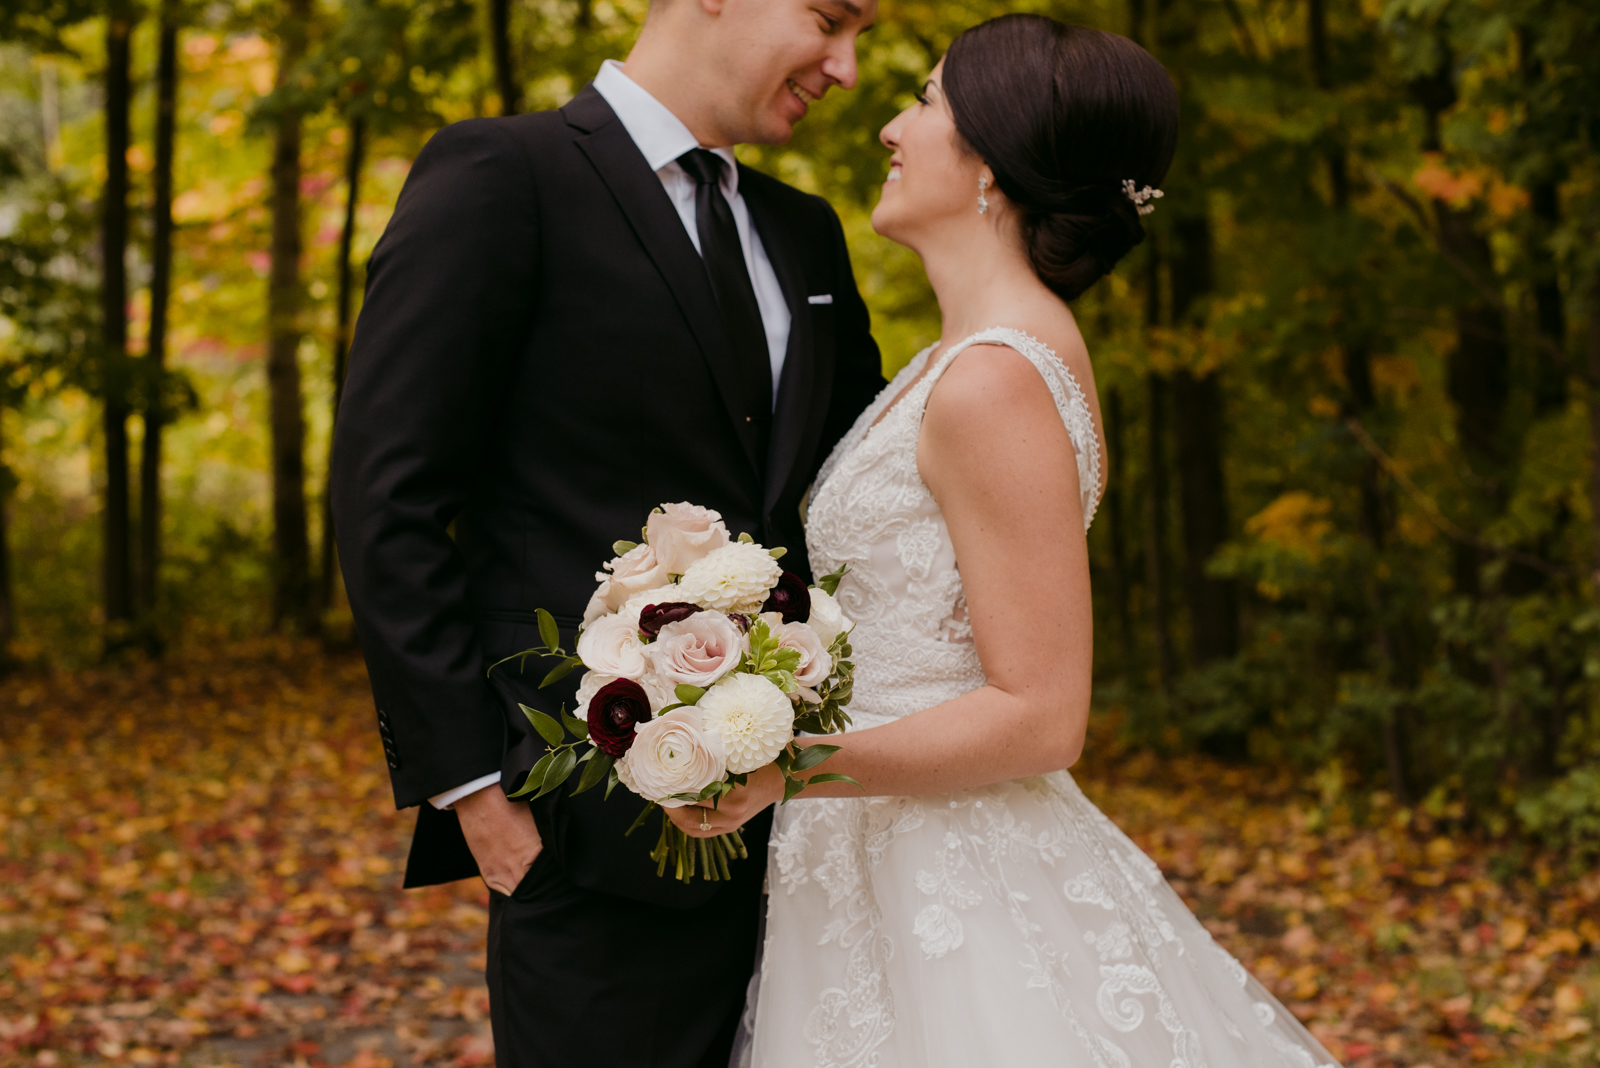 bride and groom cuddling close on path with fall leaves all around